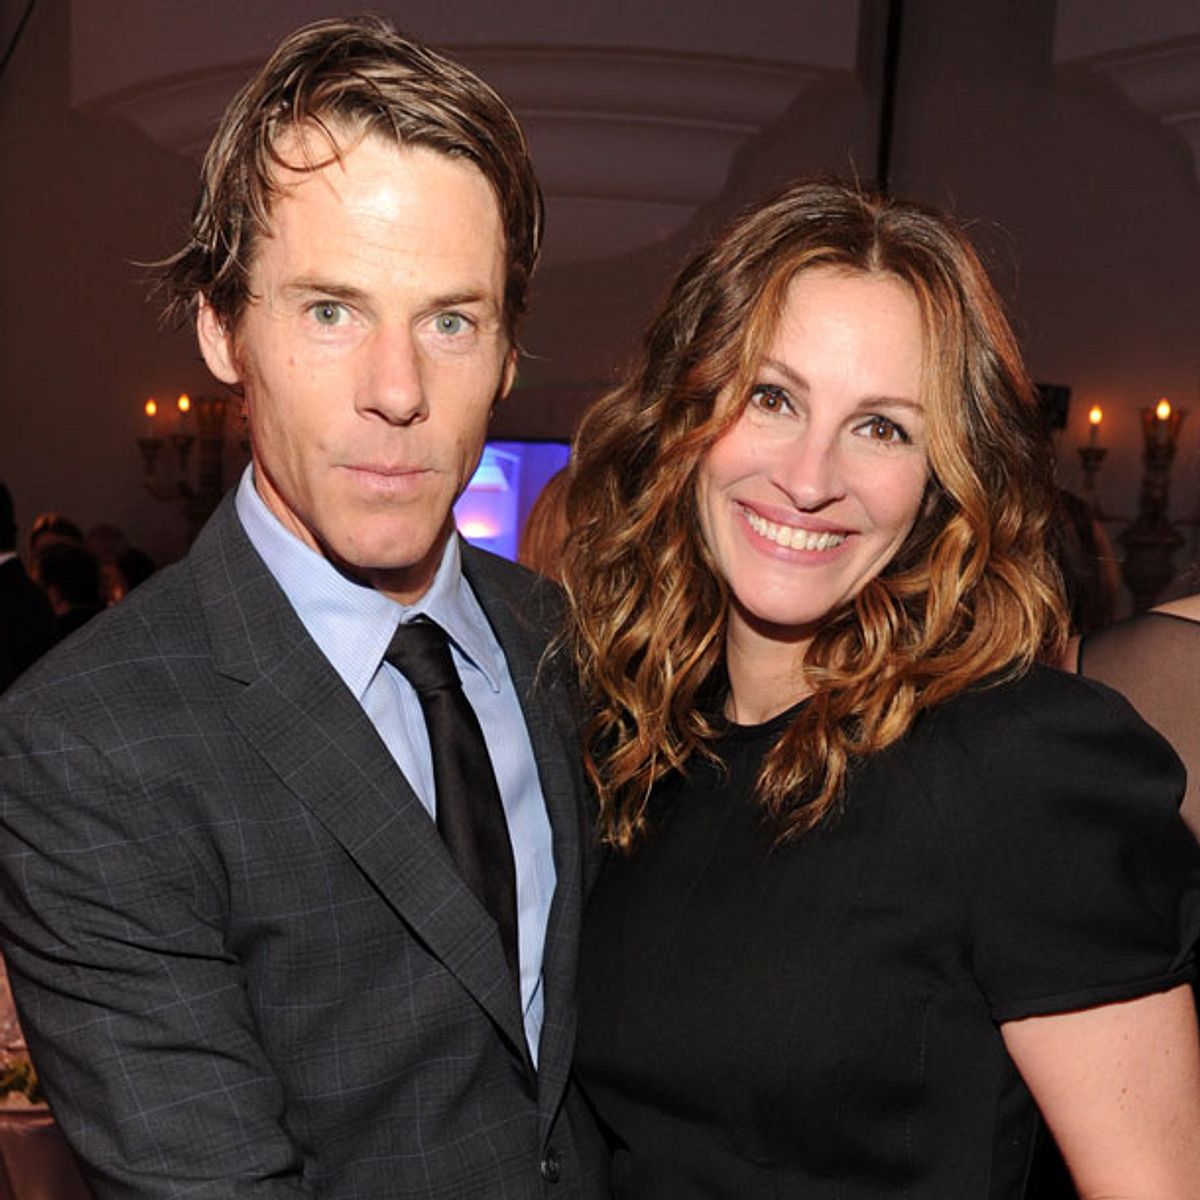 https://images.intouch.wunderweib.de/julia-roberts,id=b08574e7,b=intouch,w=1200,rm=sk.jpeg